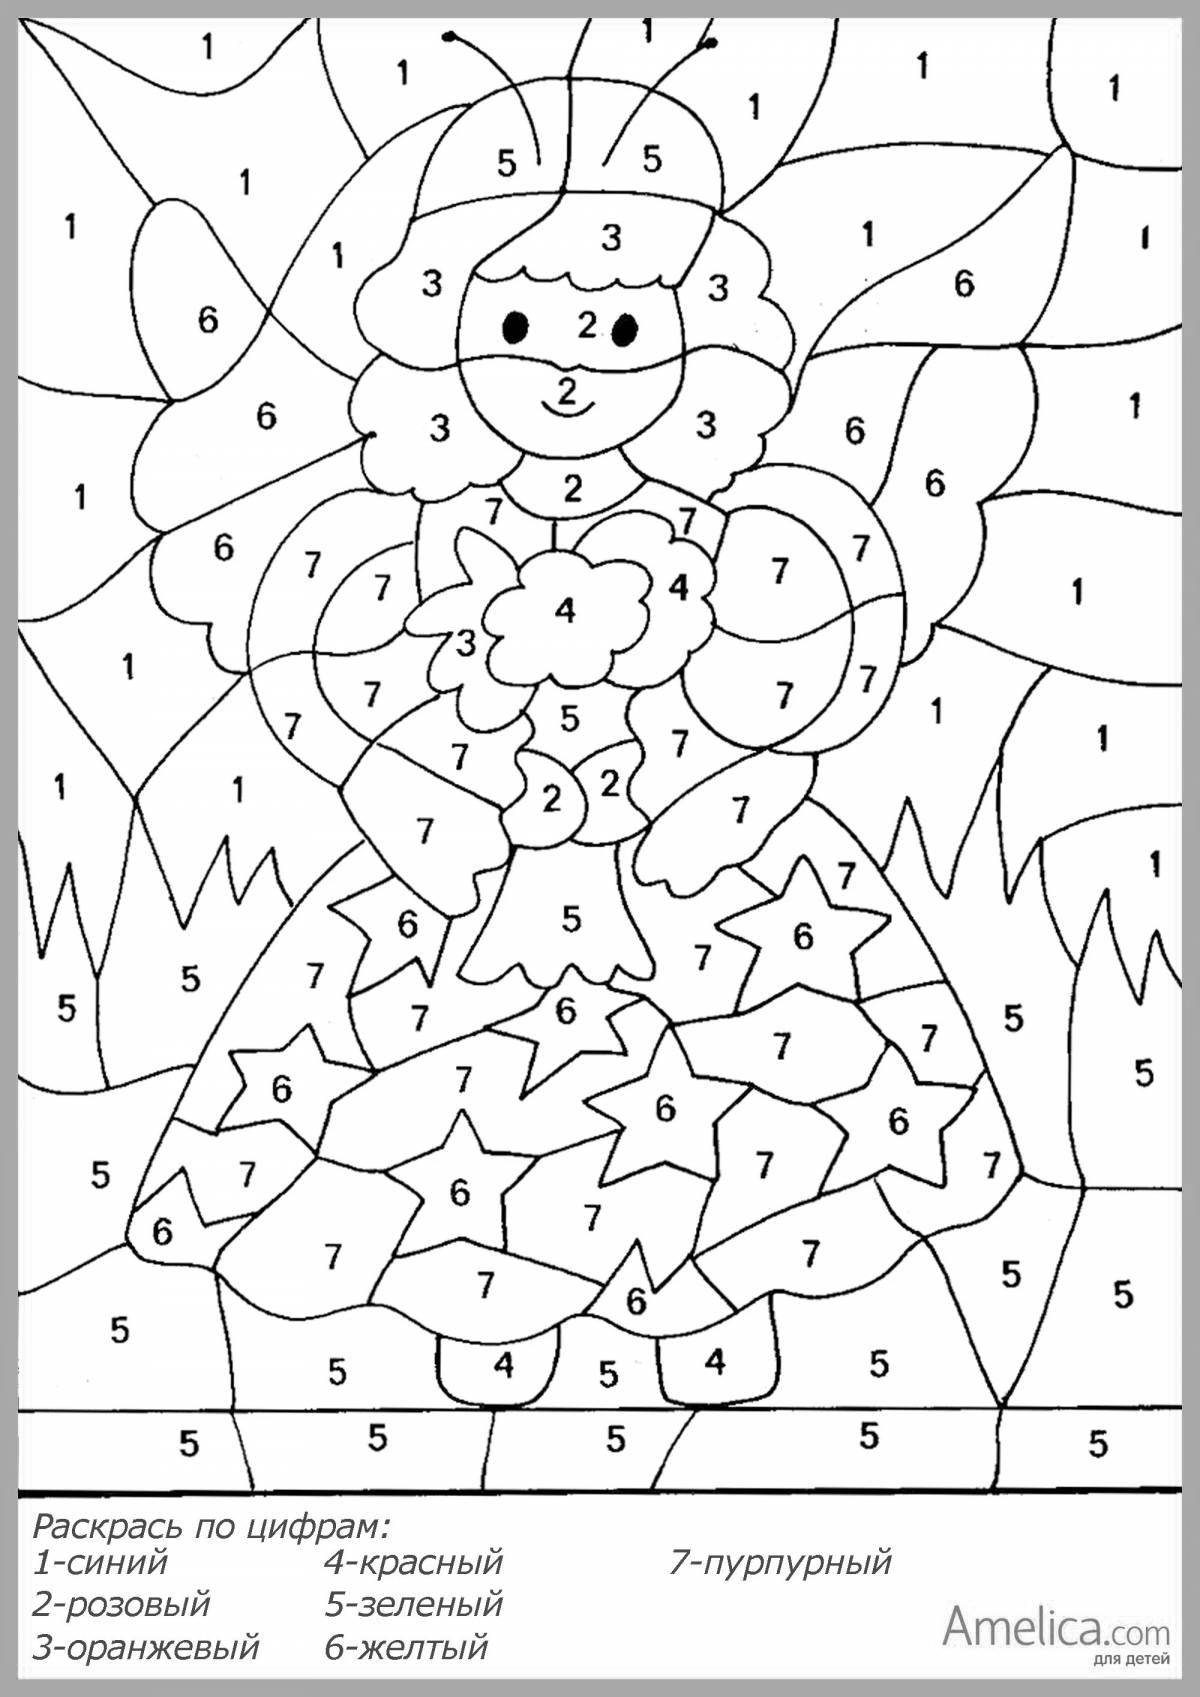 Relaxing 6 year old coloring by numbers